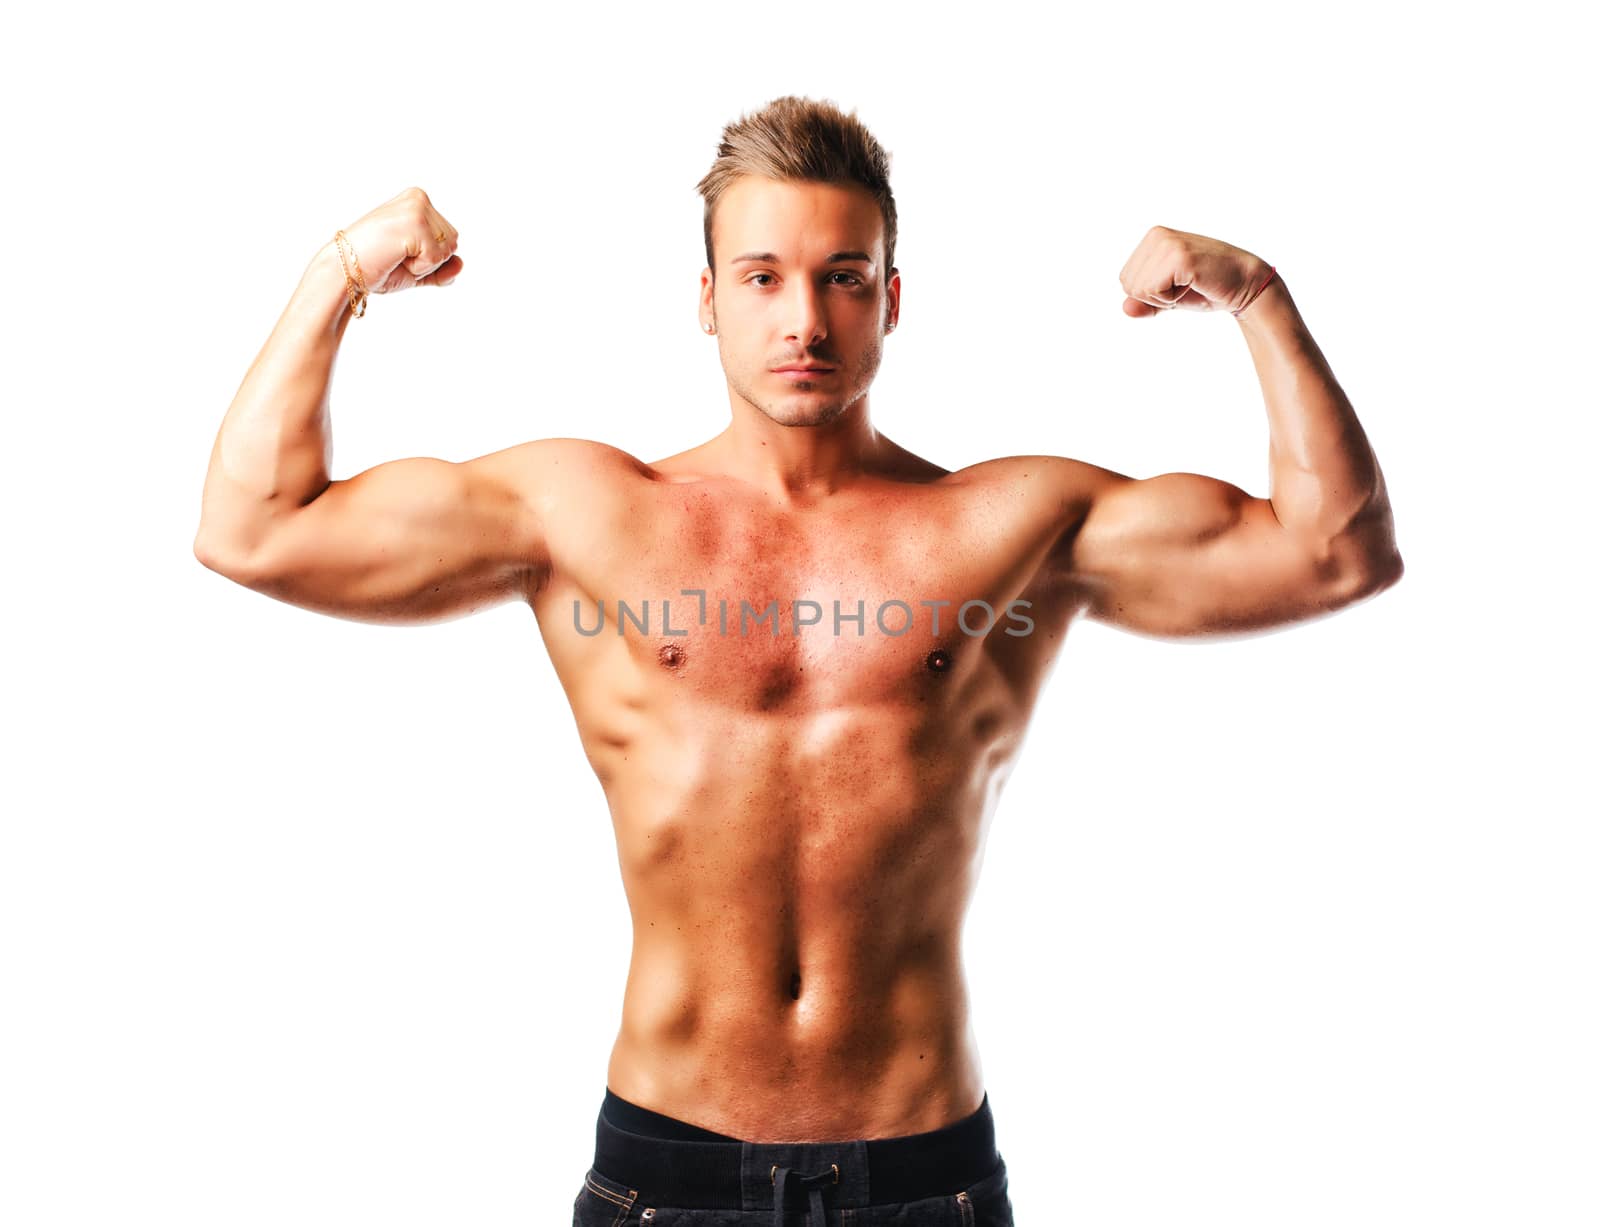 Attractive young muscular man standing naked posing, double biceps pose, isolated